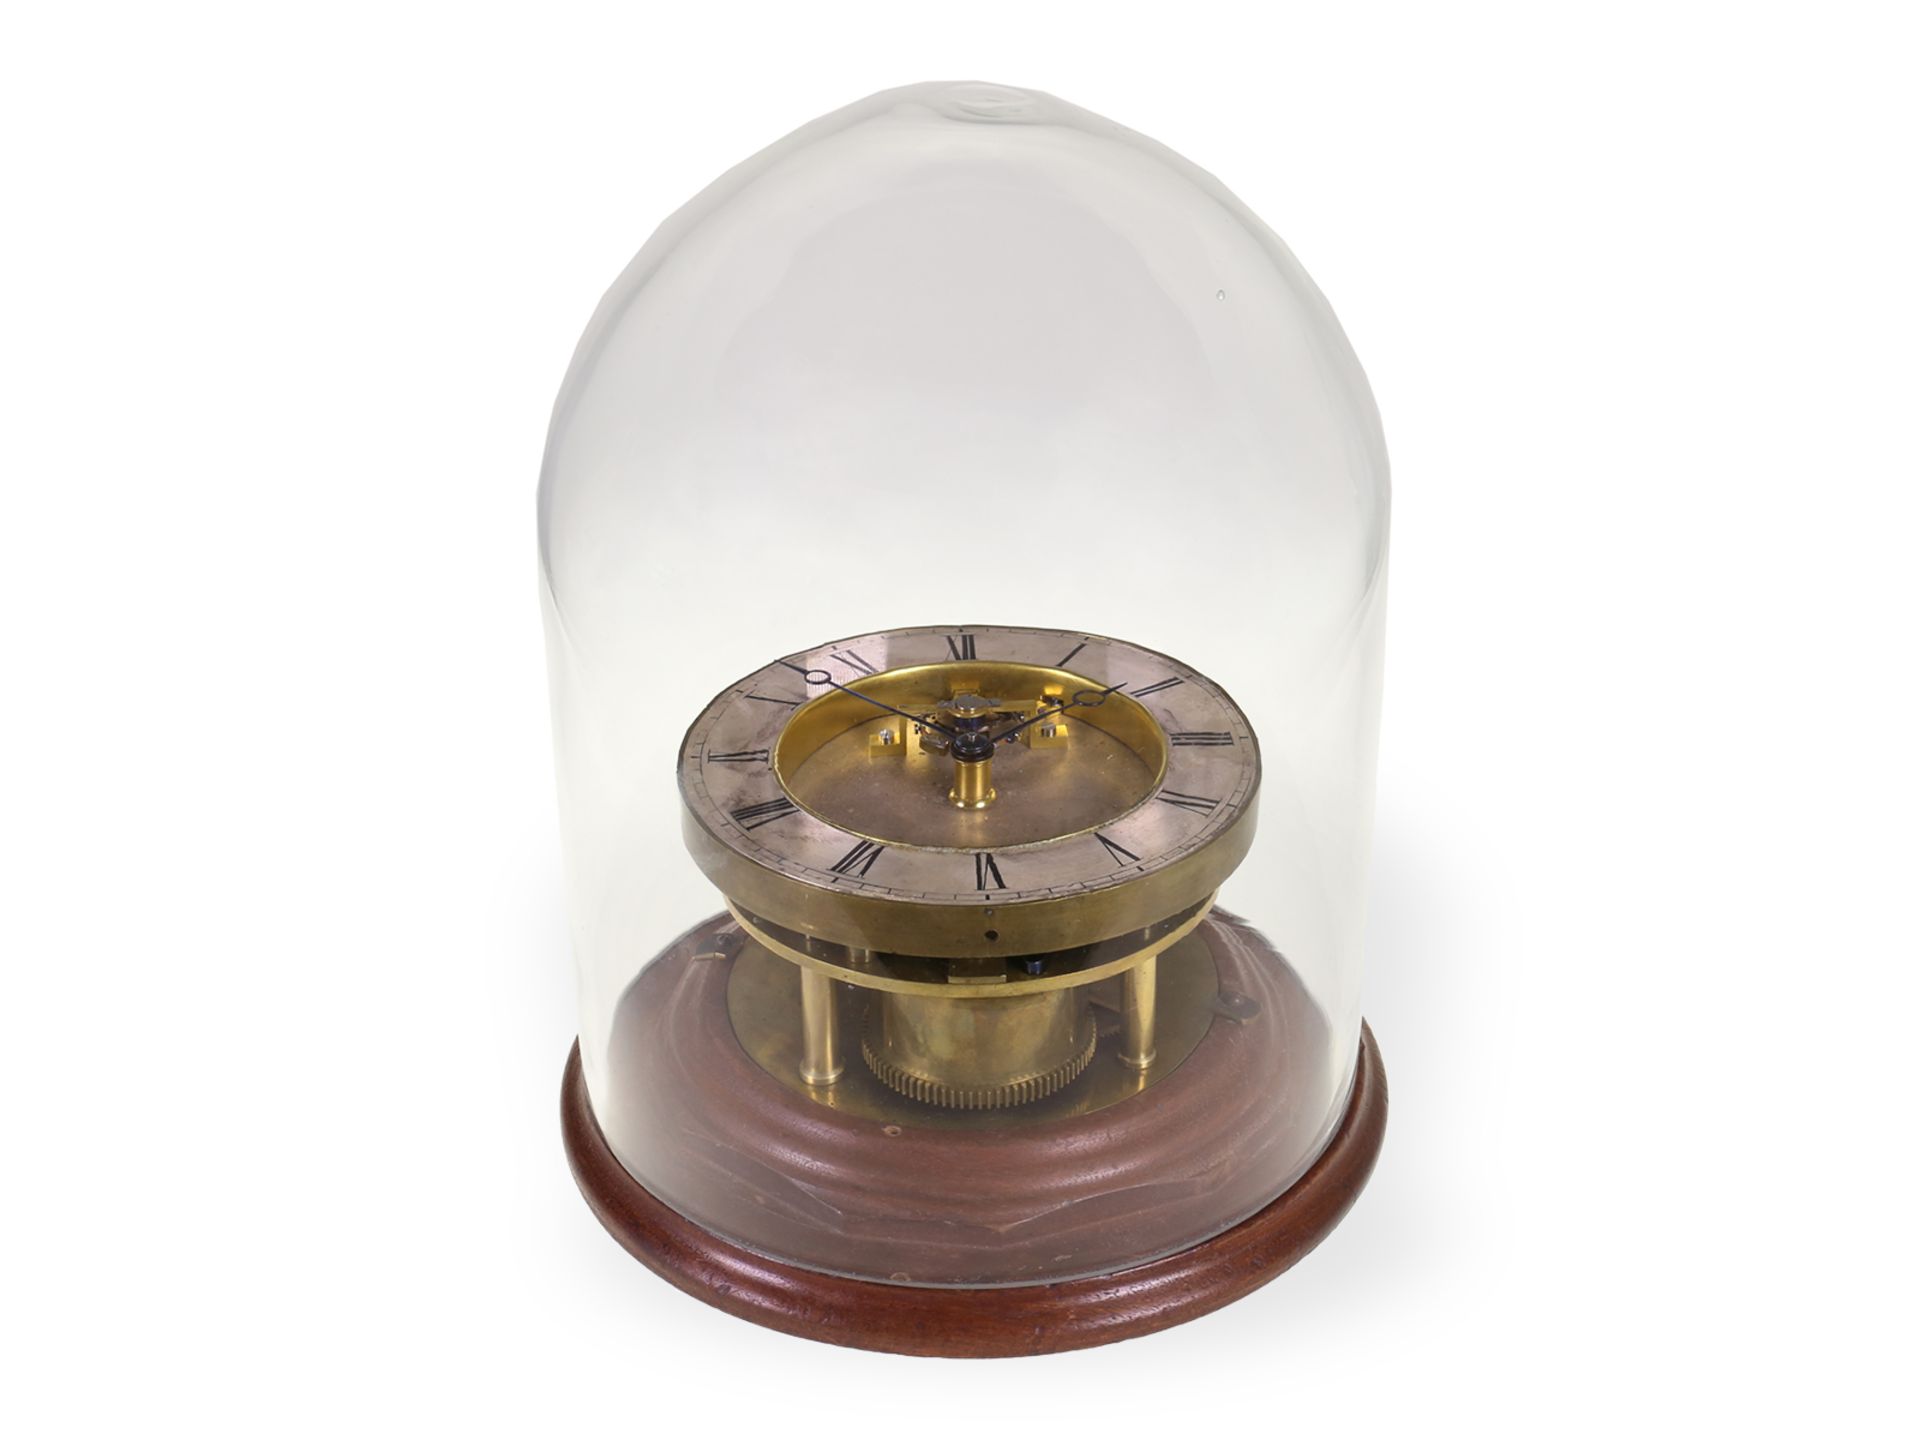 Unusual table chronometer/escapement model, possibly around 1840 - Image 4 of 4